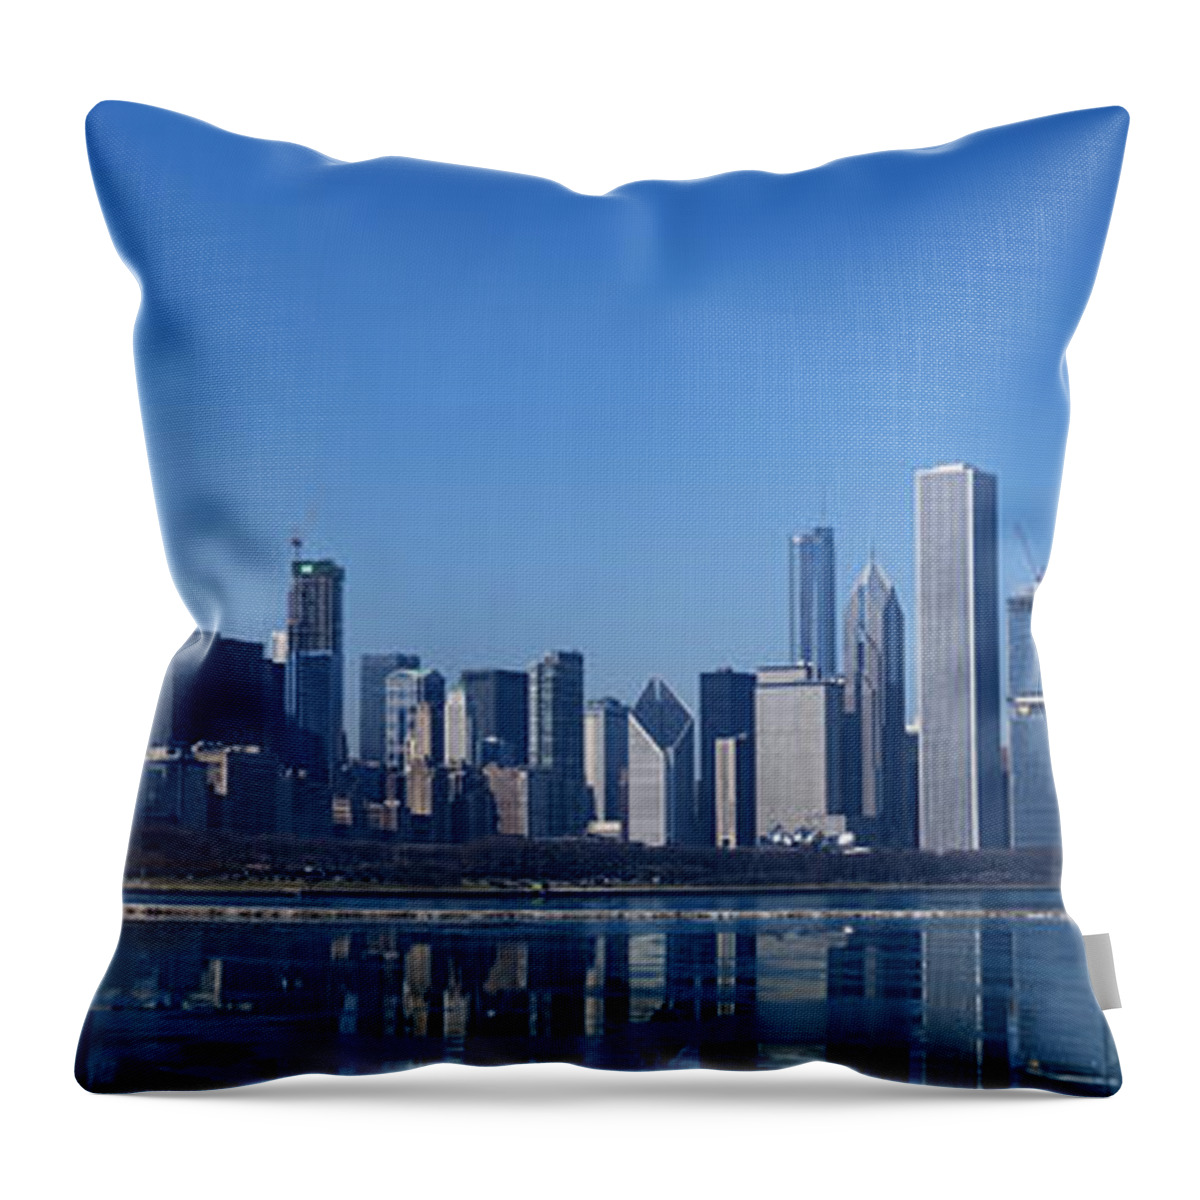 Chicago Panorama Throw Pillow featuring the photograph Chicago Panorama by Dejan Jovanovic